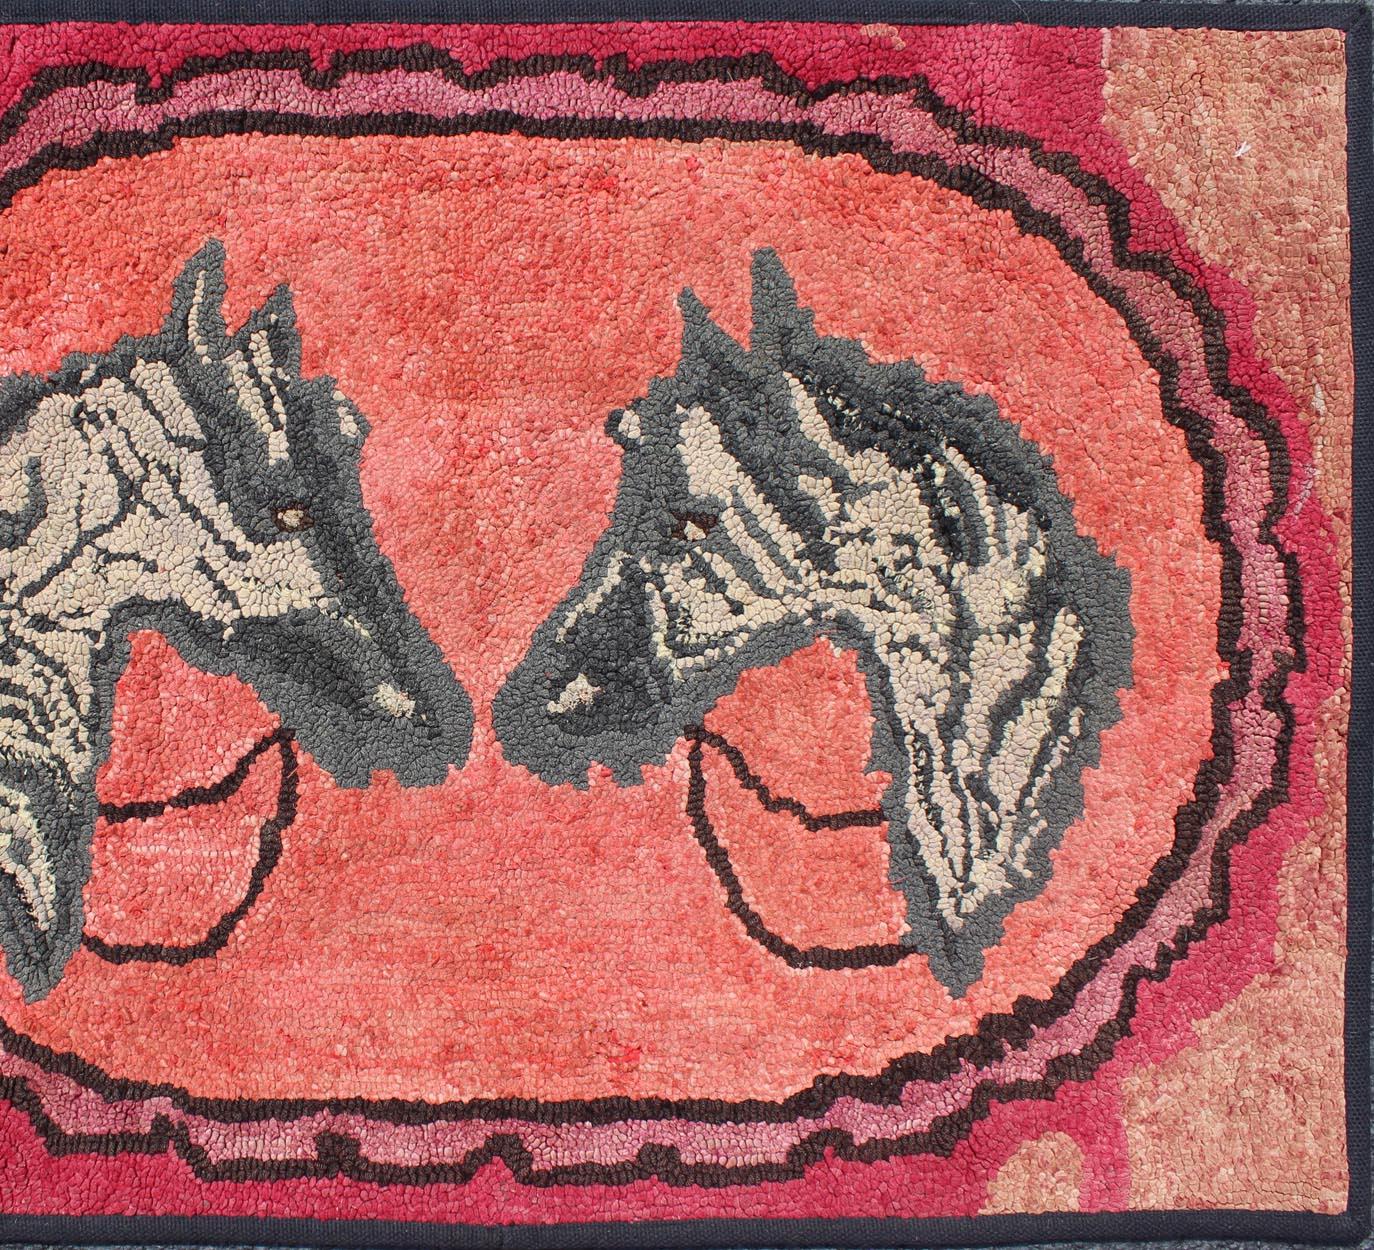 American hooked rug featuring with Double Horse Heads  , rug S12-0406, country of origin / type: United States / Hooked, circa 1900

Measures:  2'1